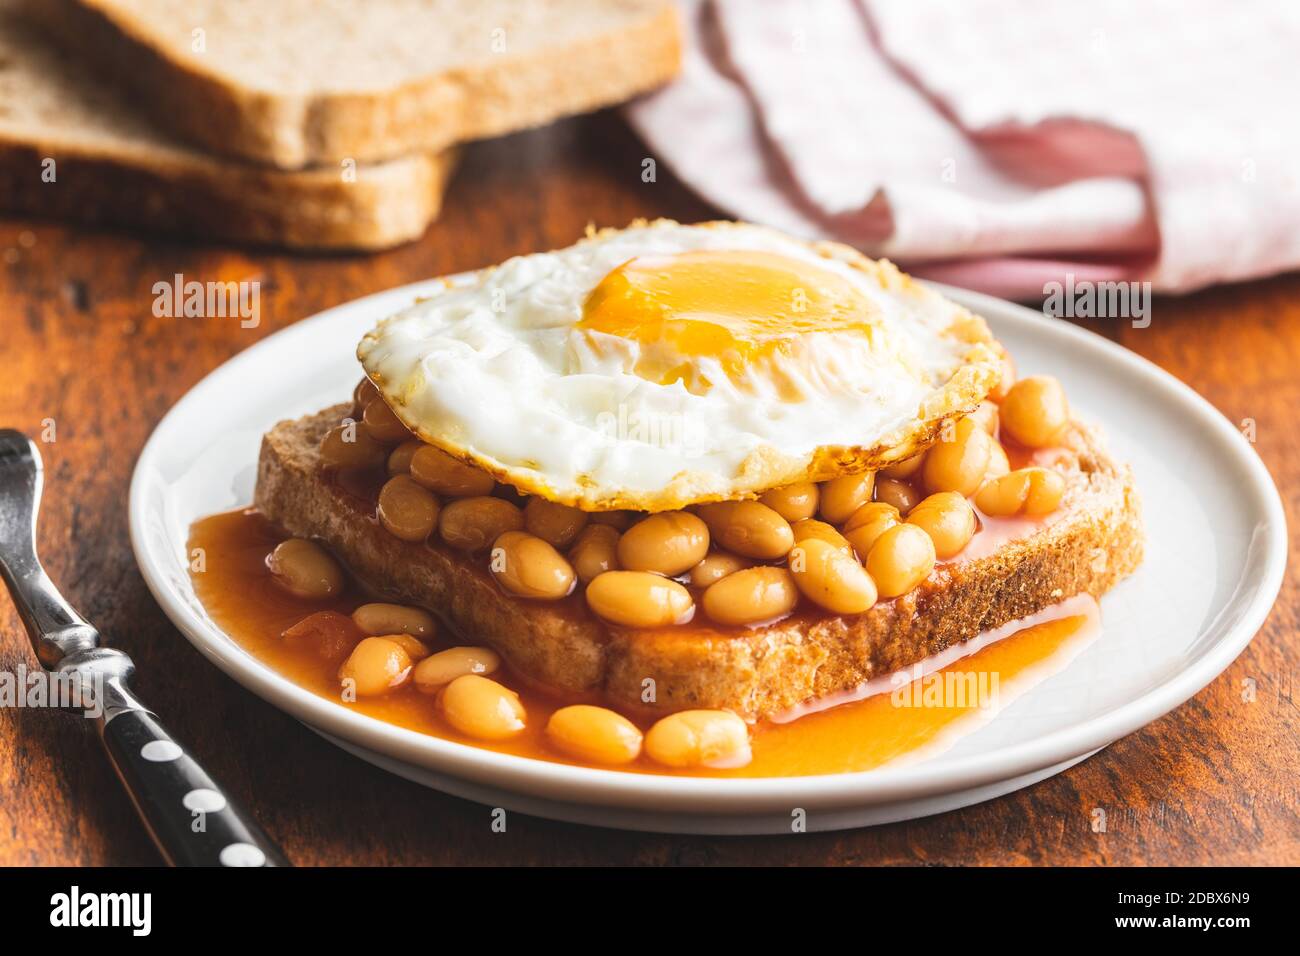 Toast with fried egg and baked beans on plate. Stock Photo